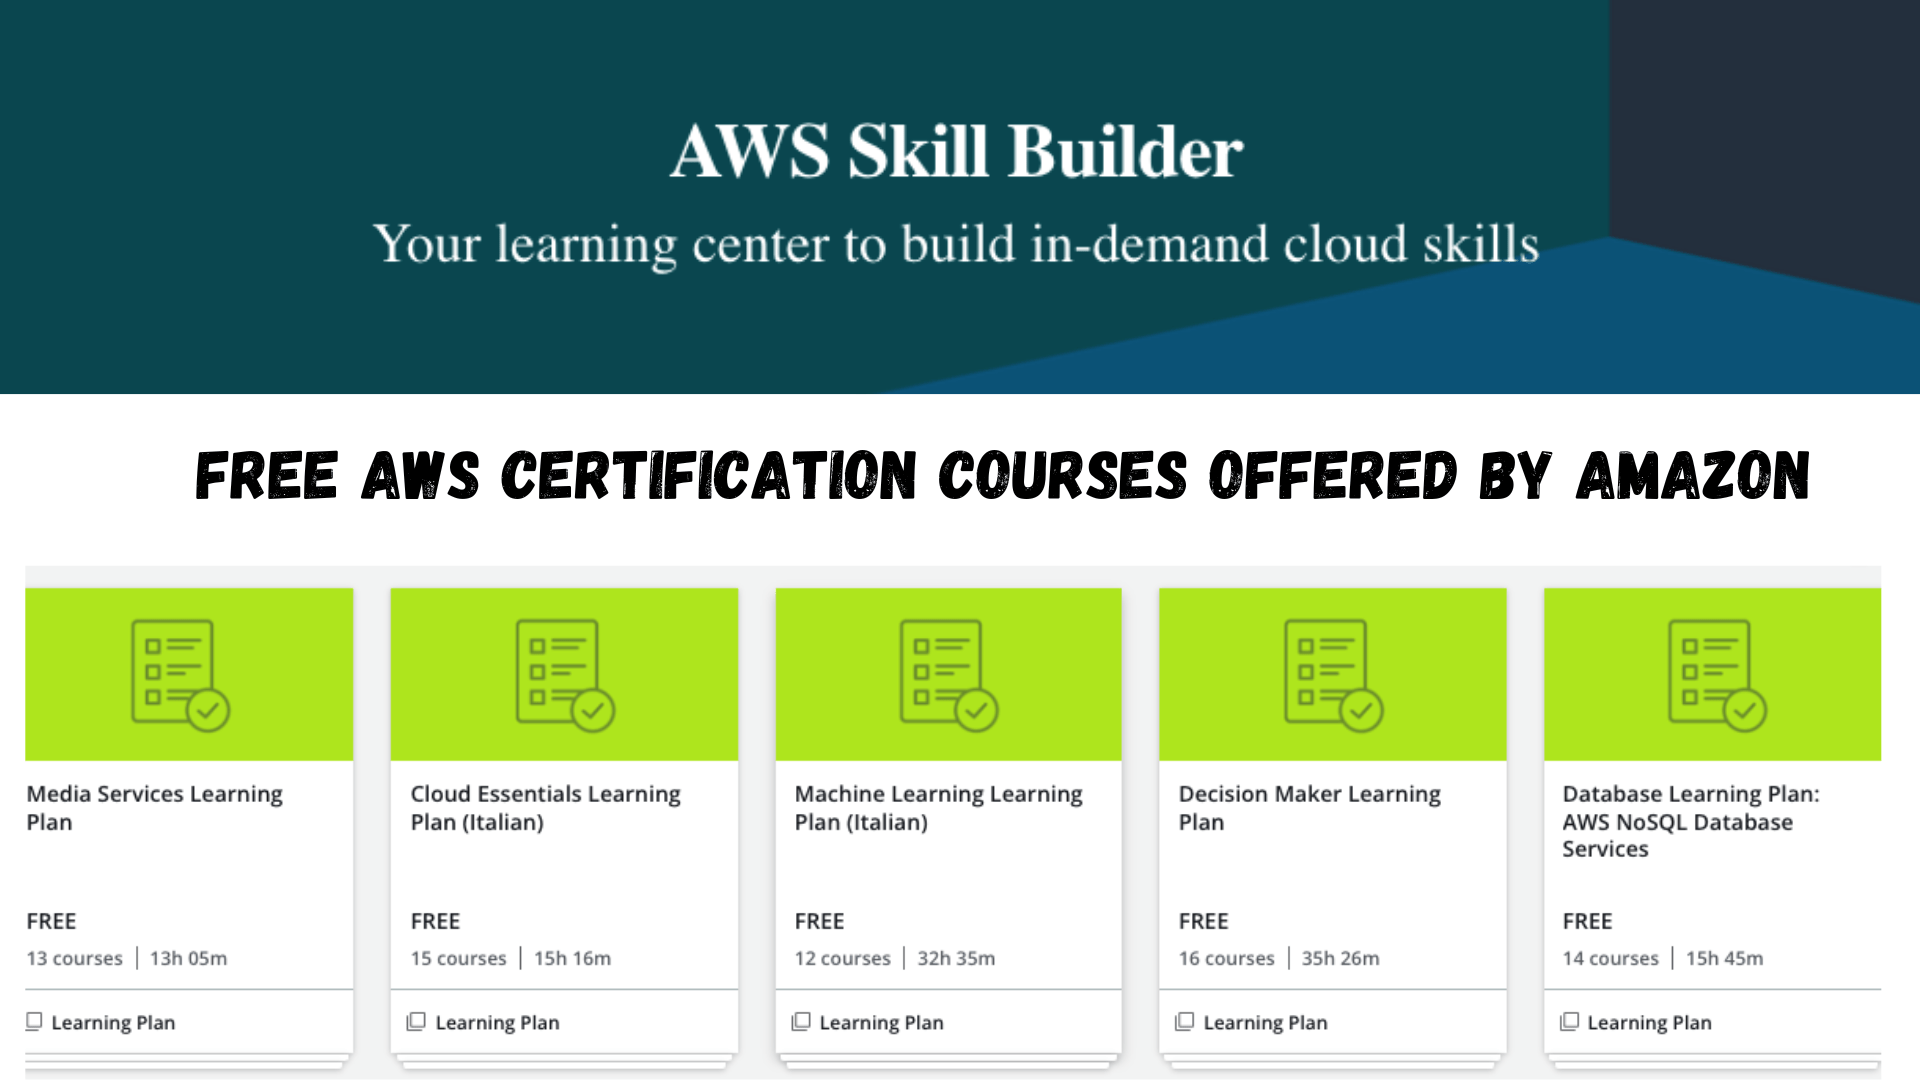 Free AWS Certification Courses offered by Amazon